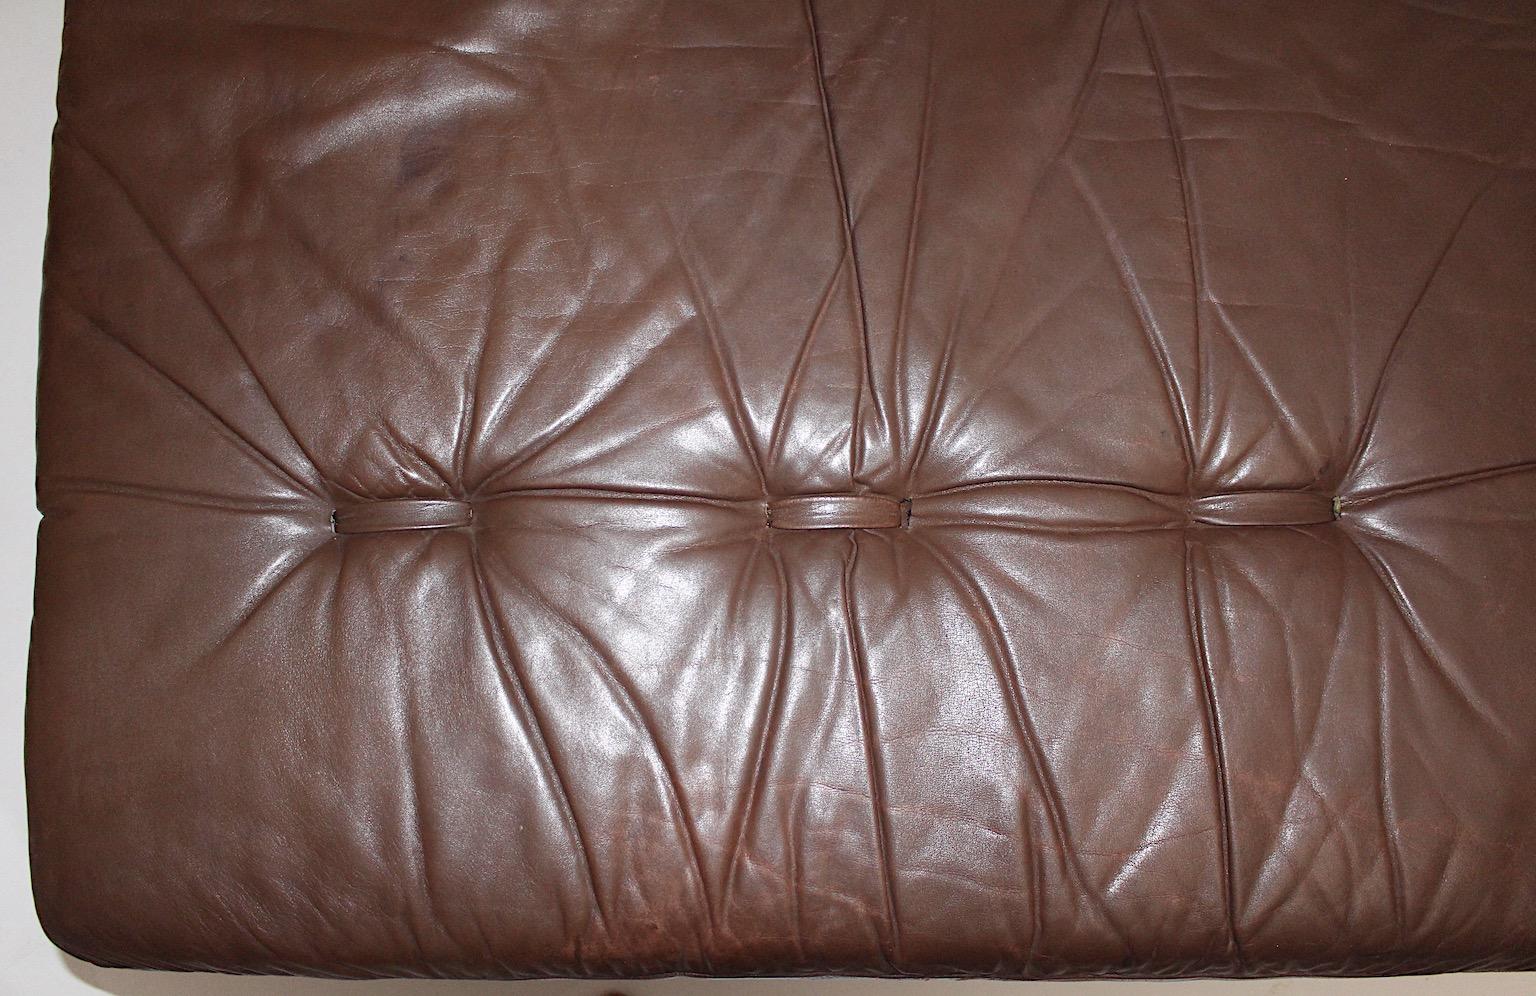 Wittmann Leather Brown Vintage Sofa or Daybed Atrium De Sede Style 1970s Austria For Sale 5